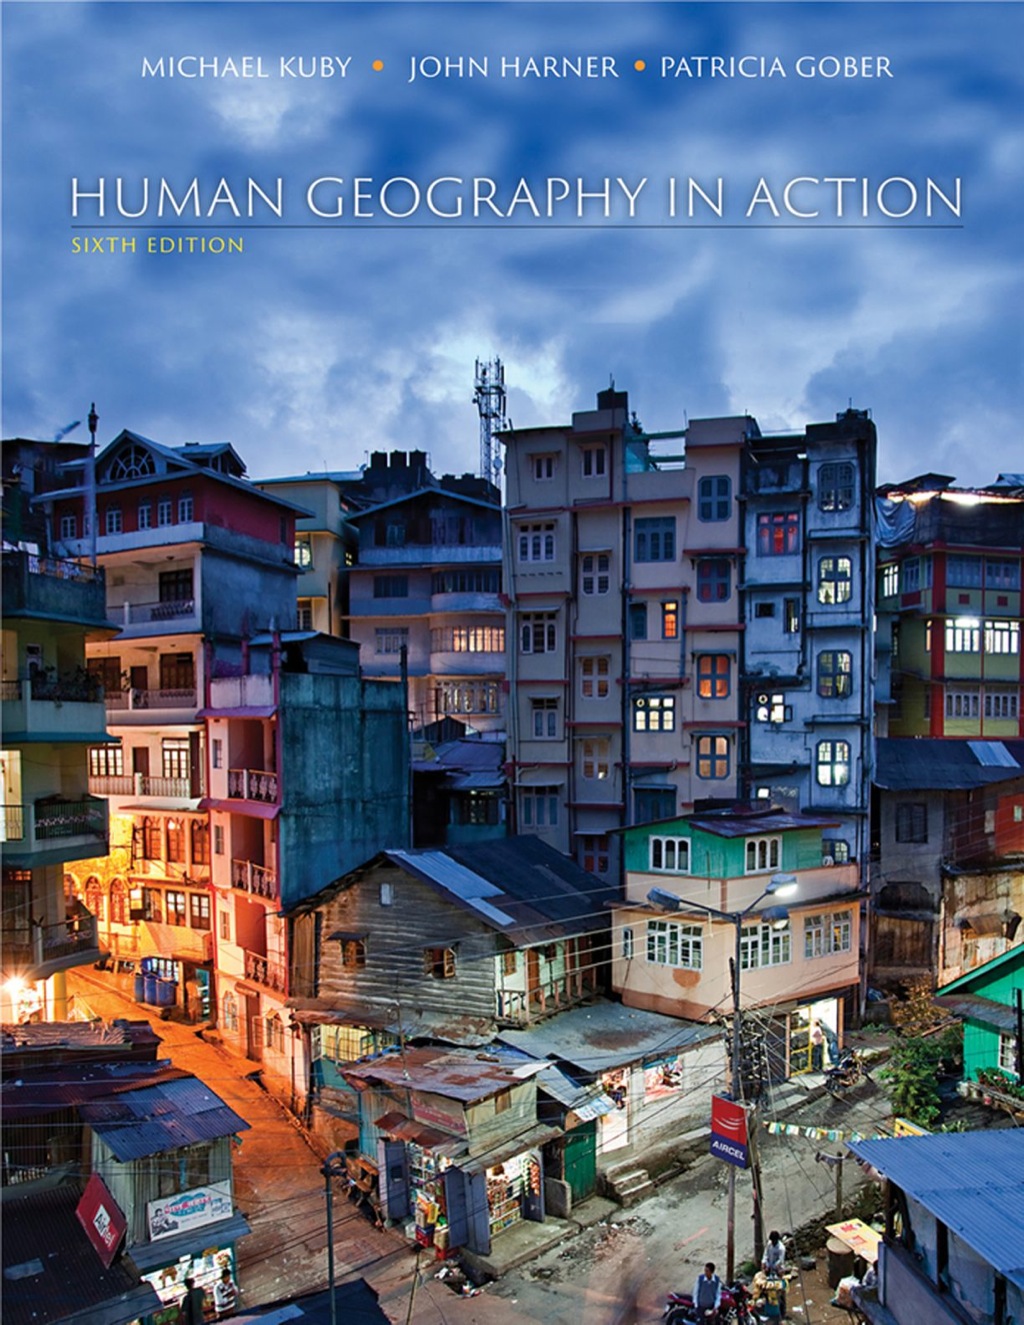 Human Geography in Action (eBook) - Michael Kuby